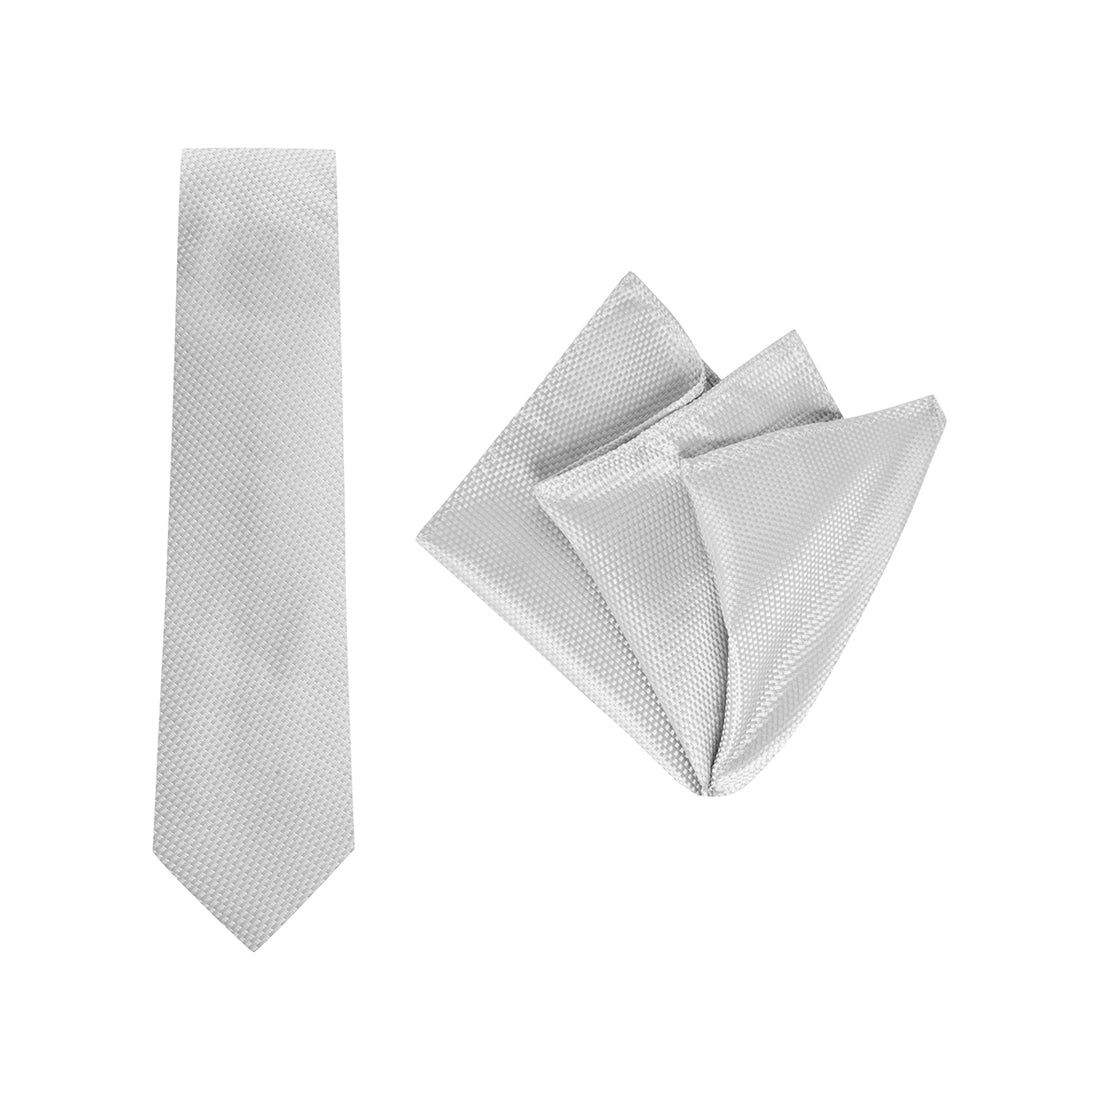 TIE + POCKET SQUARE SET. Carbon. Silver. Supplied with matching pocket square.-Ties-PEROZ Accessories